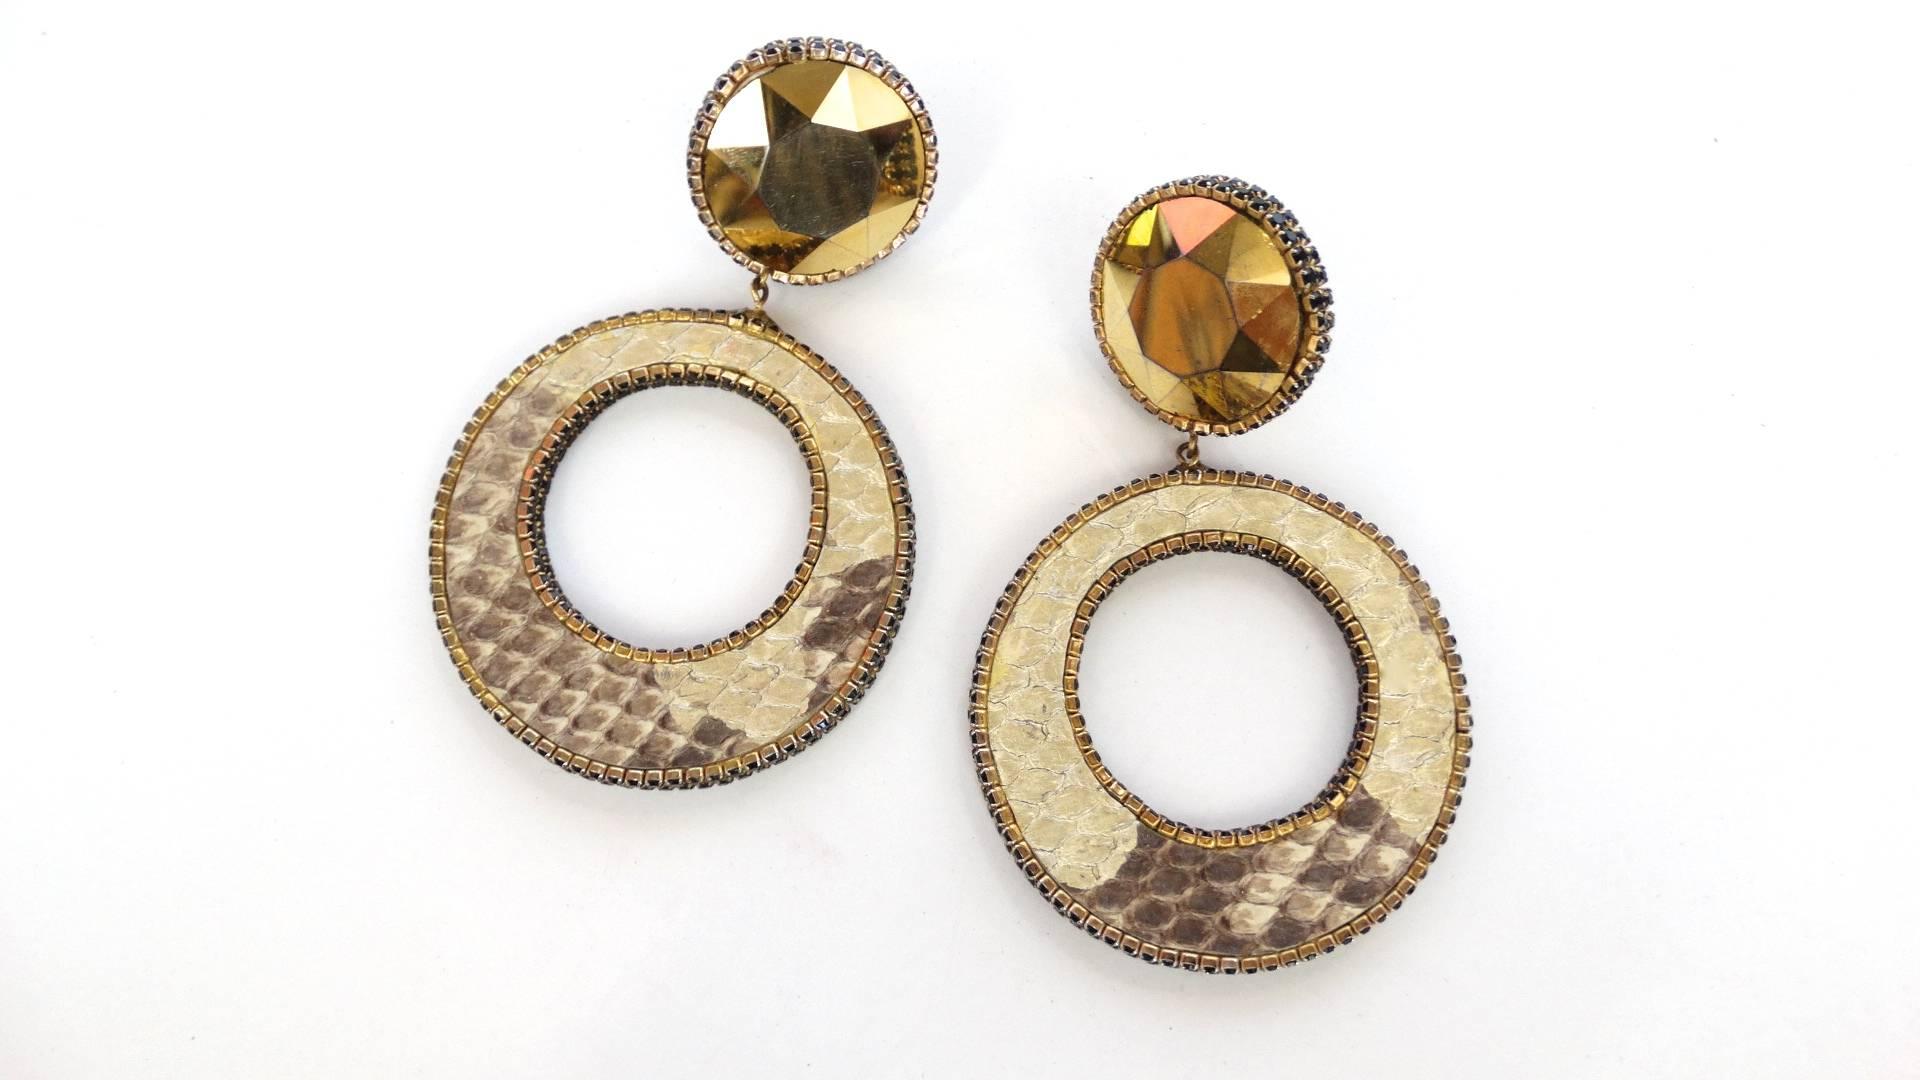 A fabulous pair of Deanna Hamro python hoop earrings. look at the details the edges are trimmed with small black rhinestones adding a great finished look. These earrings are 4 inches long by 2 inches wide. Clips are secure signed Deanna Hamro Los